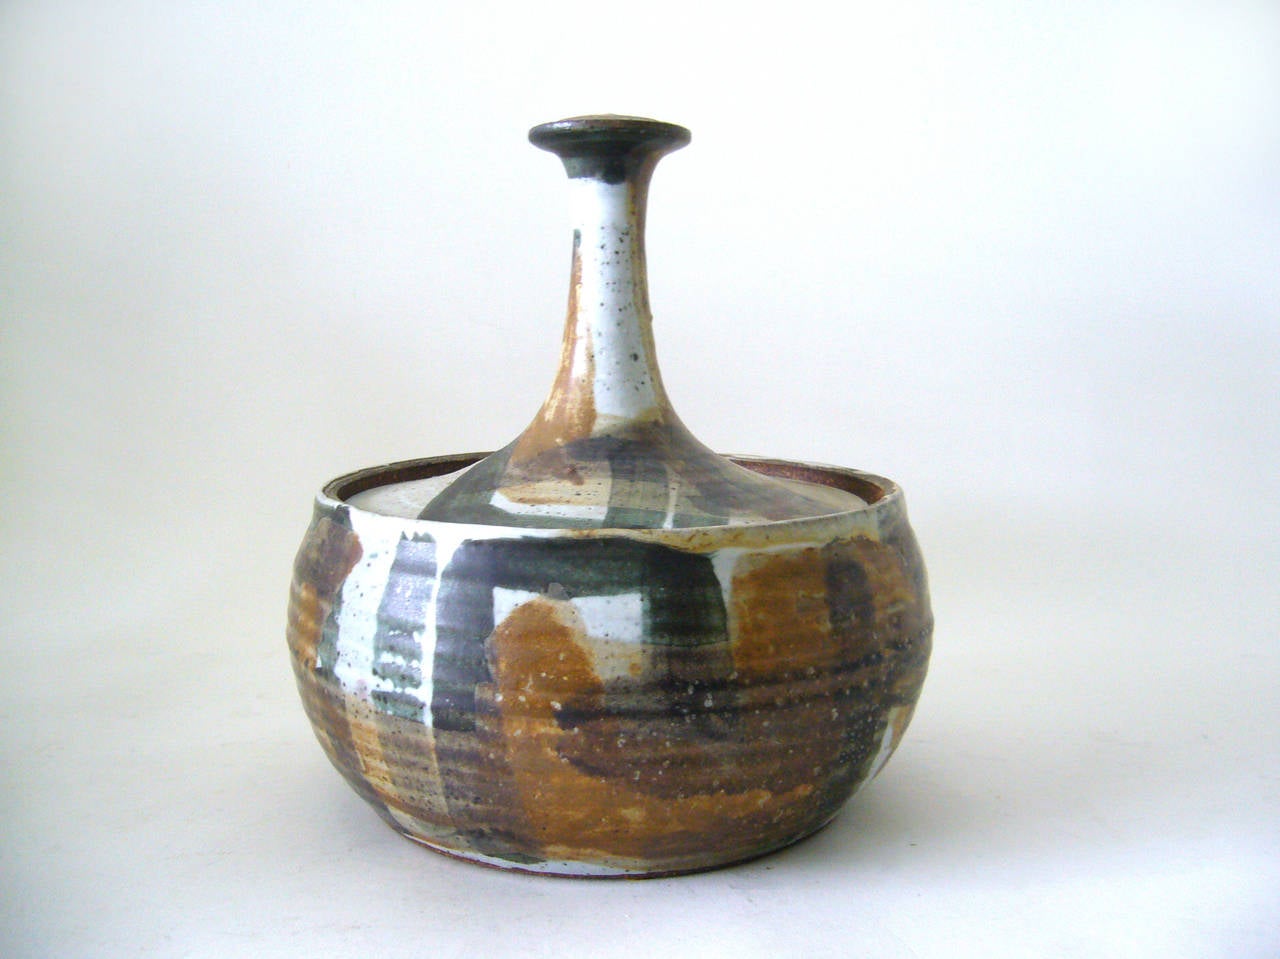 A stoneware lidded vessel created by Joel Edwards, circa 1950s or 1960s. Piece measures 9" in height by 8" in diameter. Signed Edwards on verso. In excellent vintage condition.